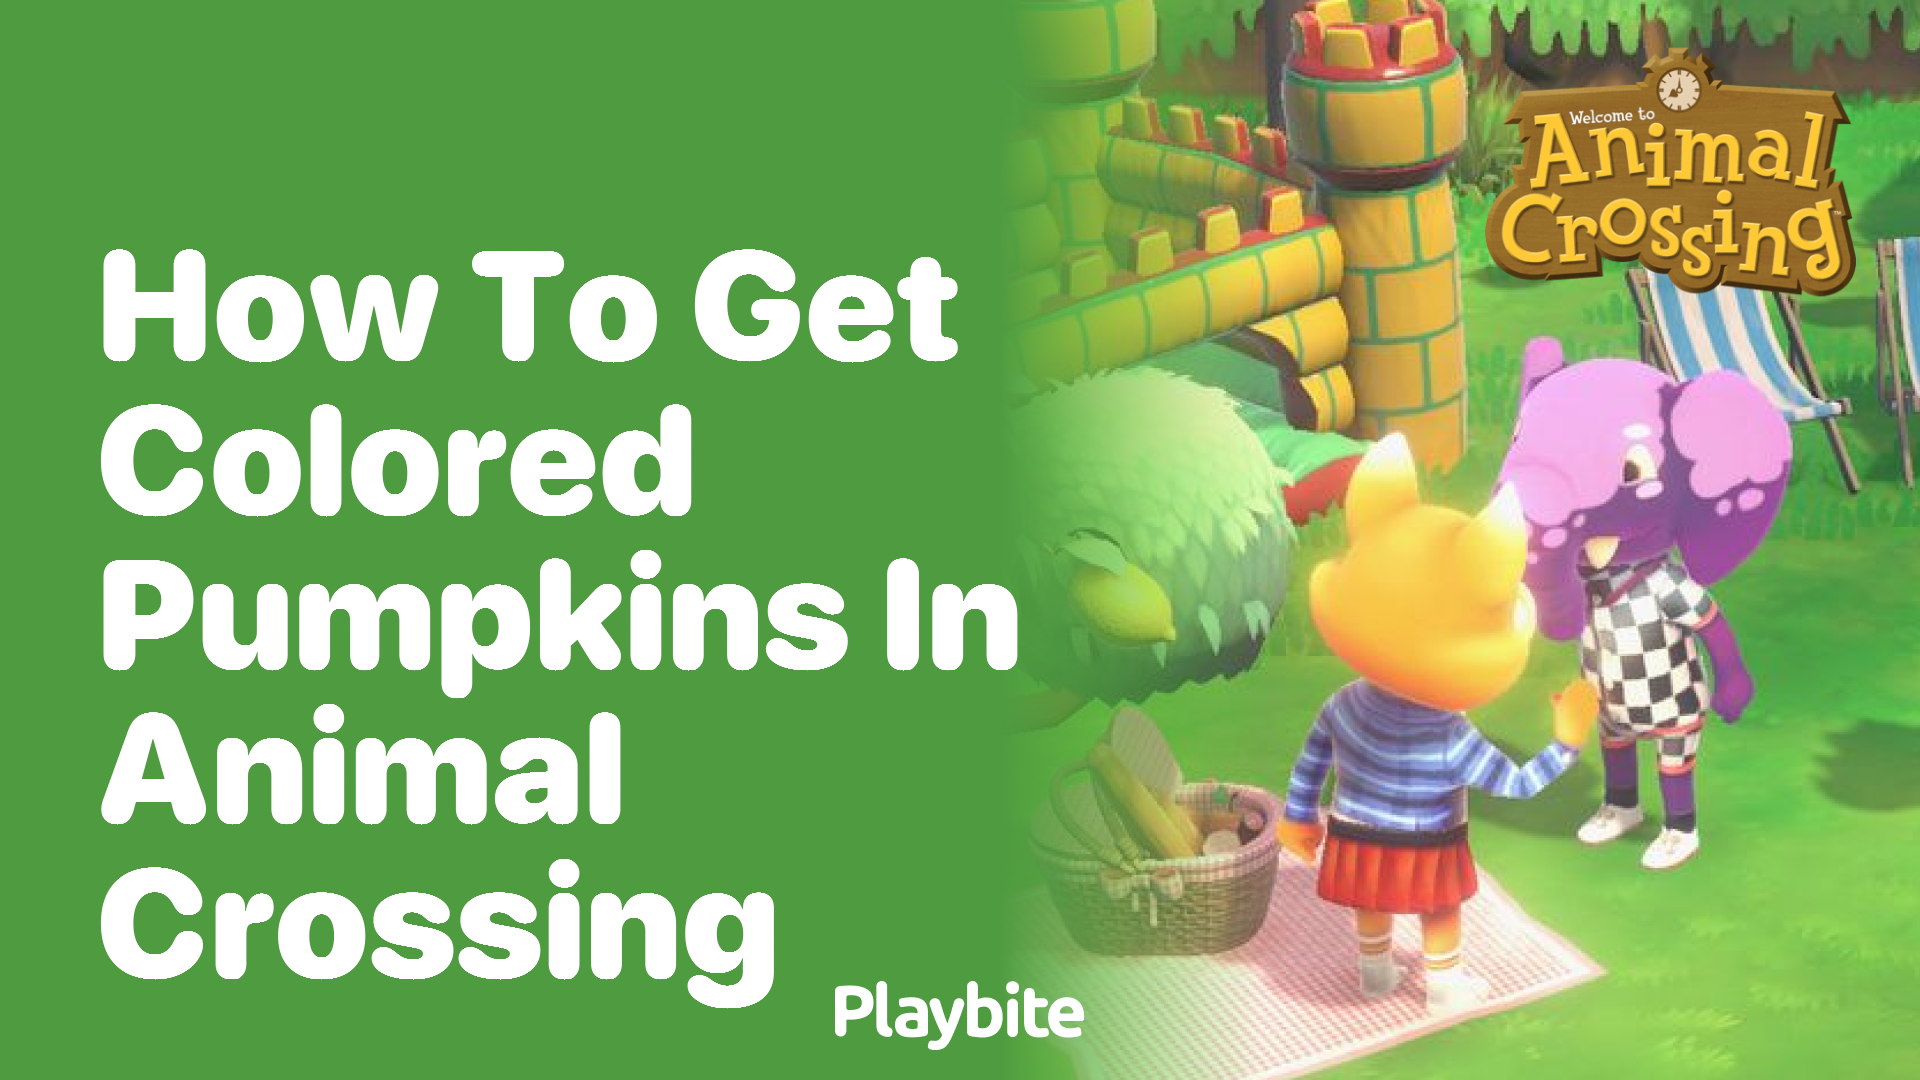 How to Get Colored Pumpkins in Animal Crossing